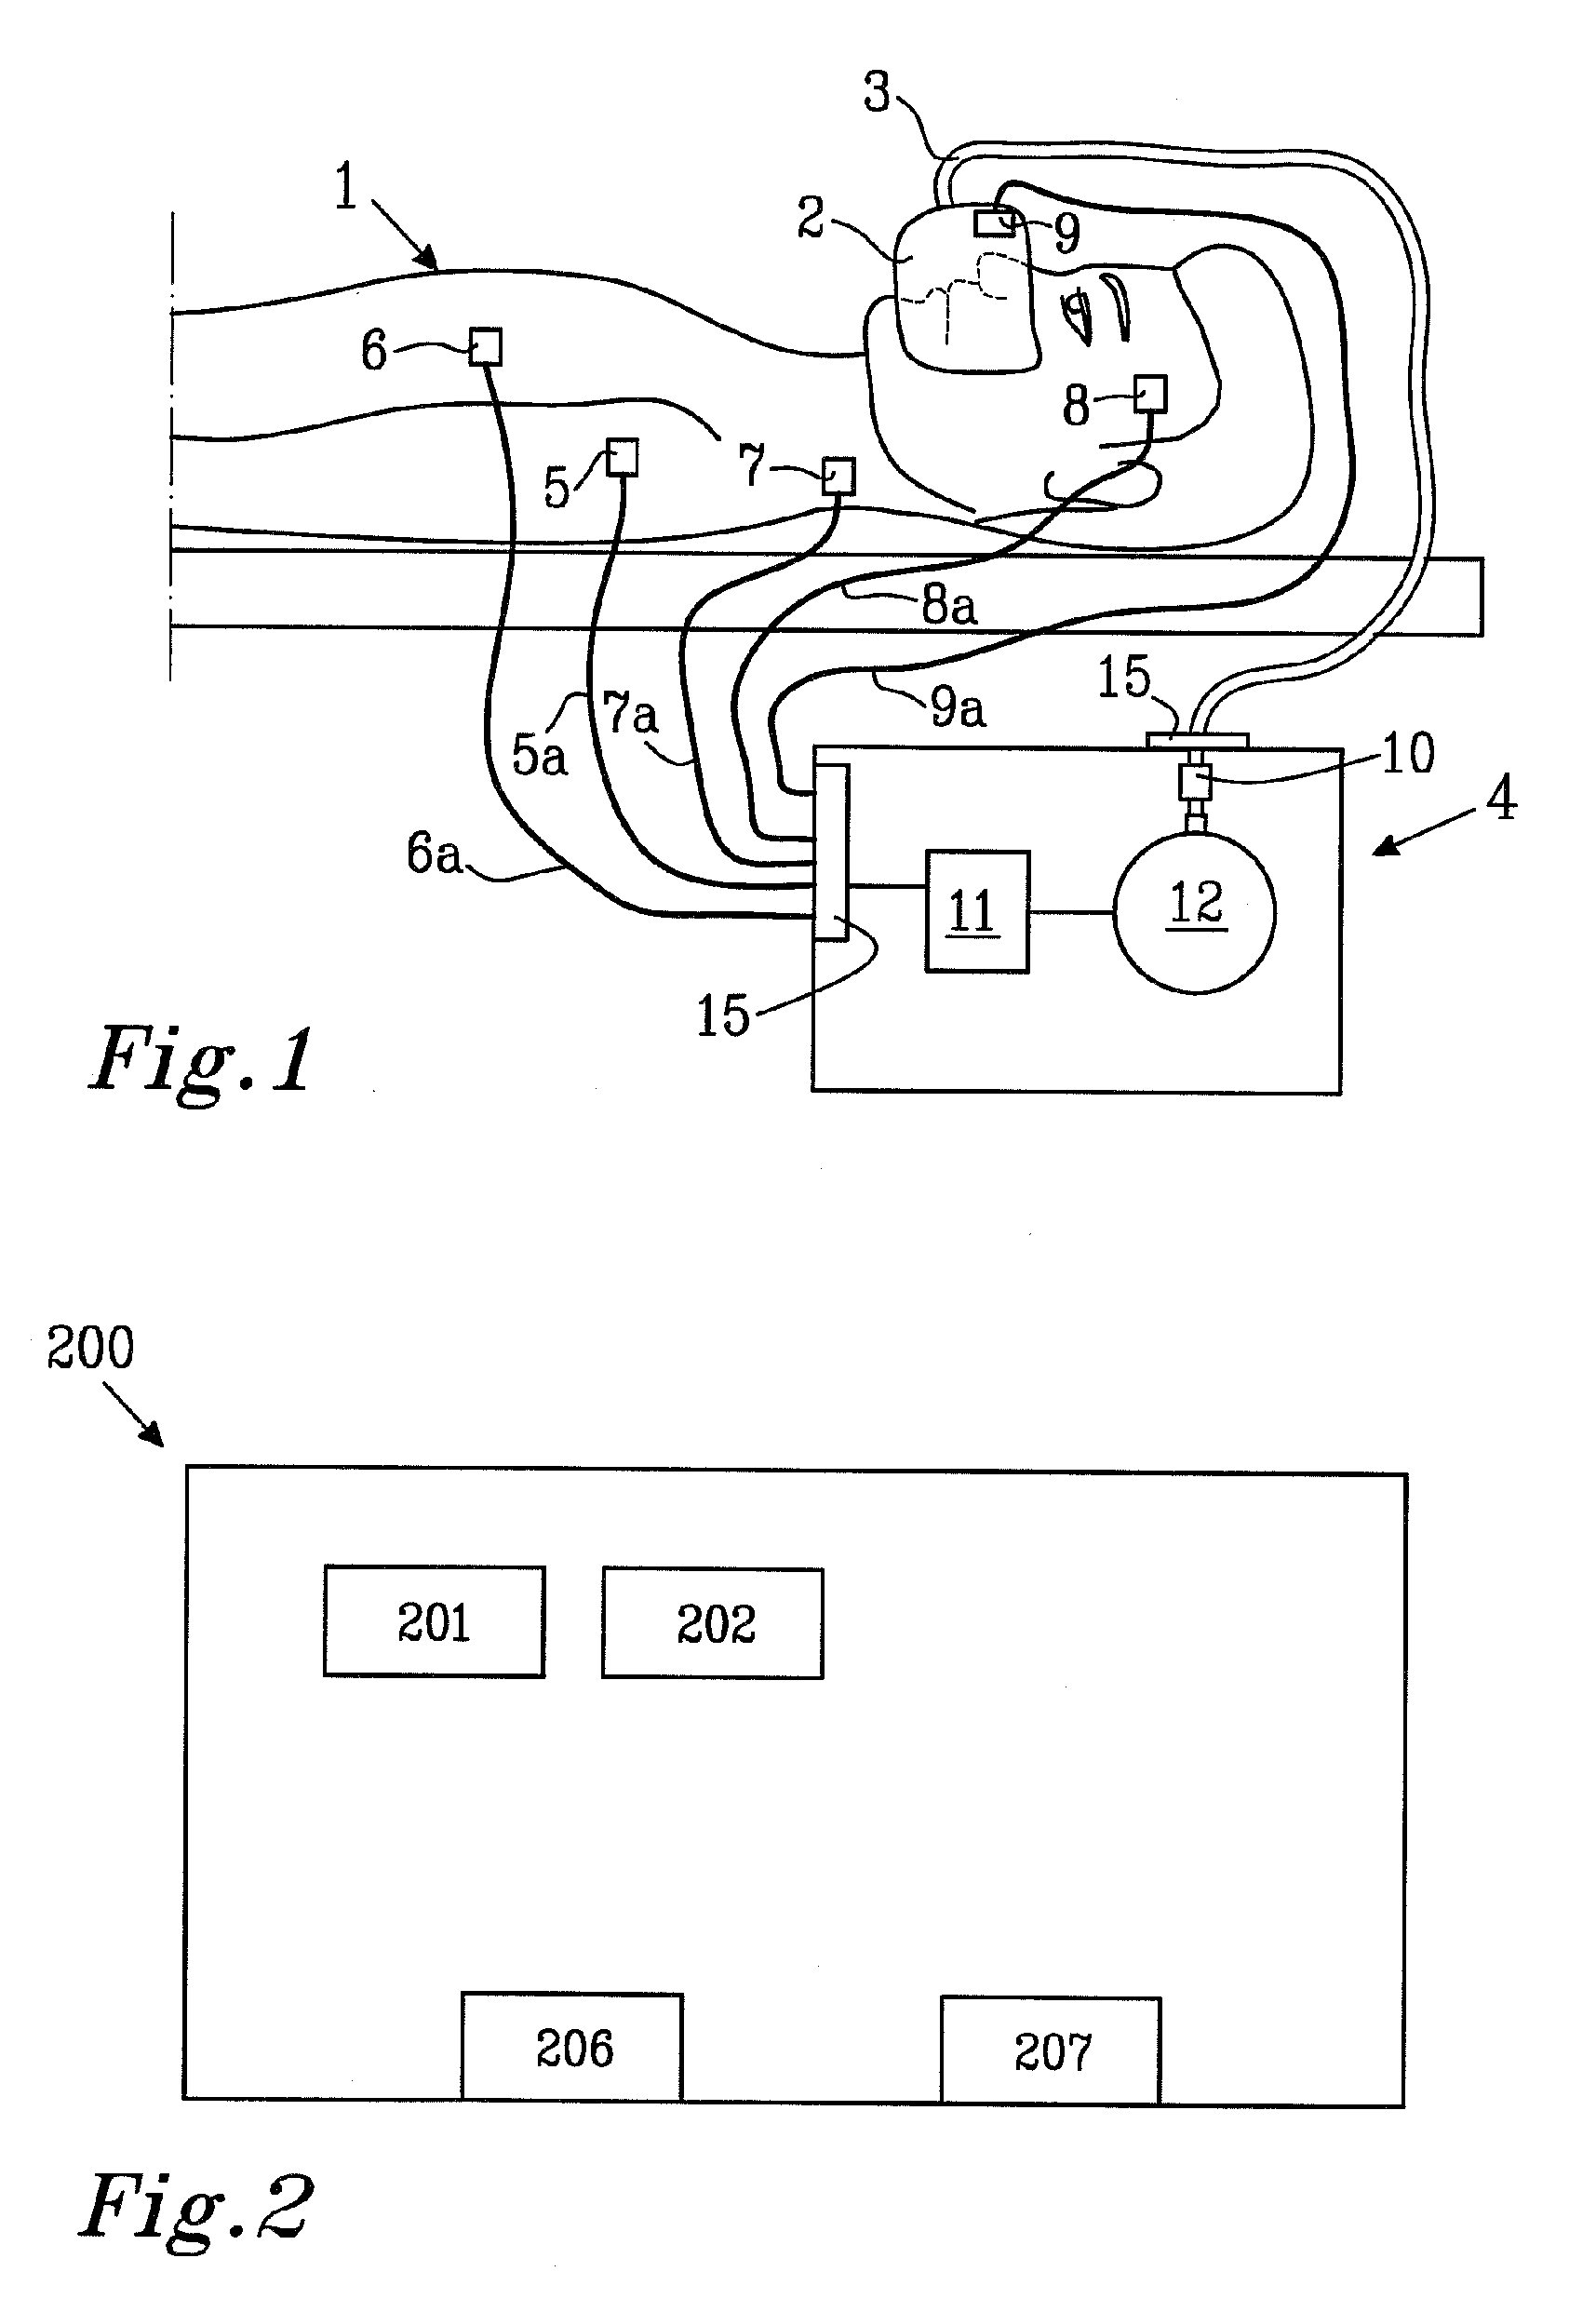 Apparatus, method, system and computer program for leakage compensation for a ventilator